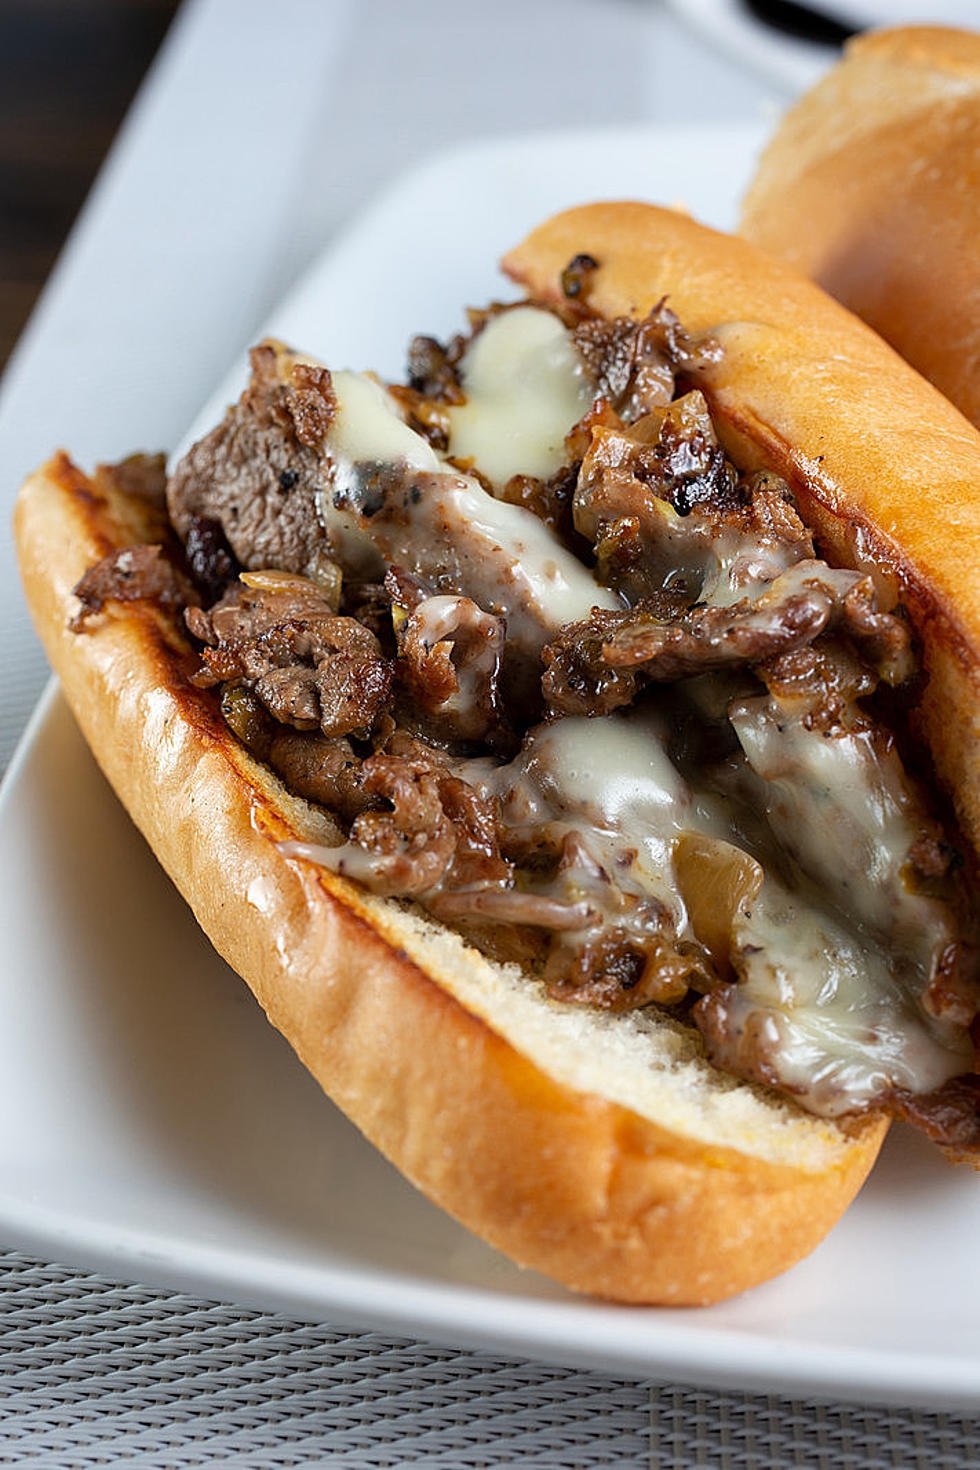 Philly Cheesesteak Great Debate: Melted Cheese Or Cheese Whiz